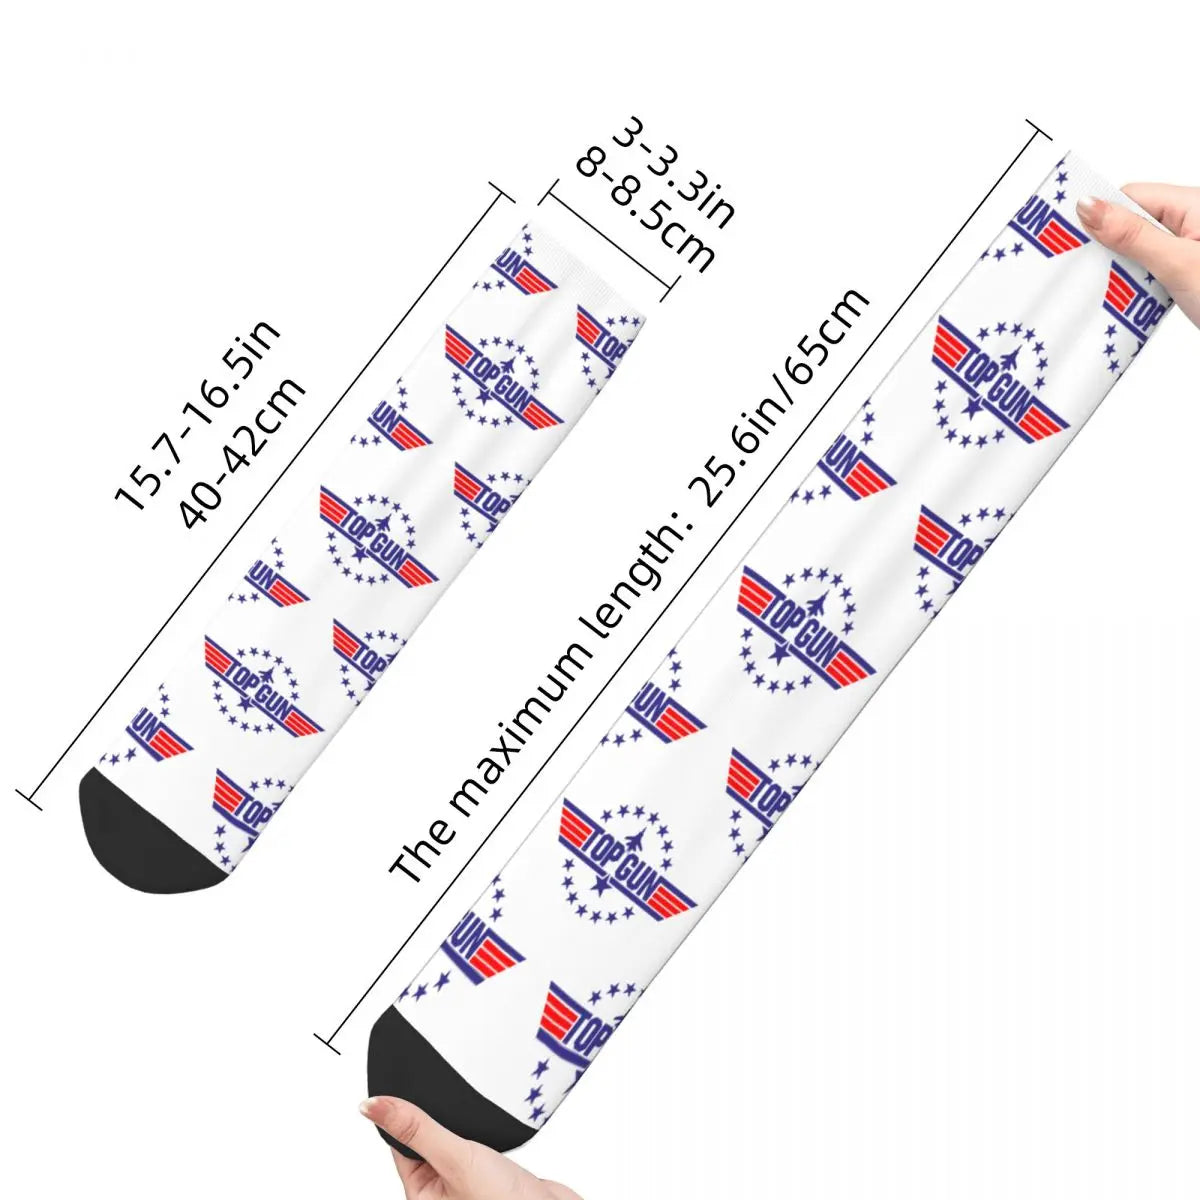 Top Gun Vintage Skateboard Socks - Happy Funny Male Men's Harajuku - Women's Stockings for All Seasons-as the picture shown-One Size-